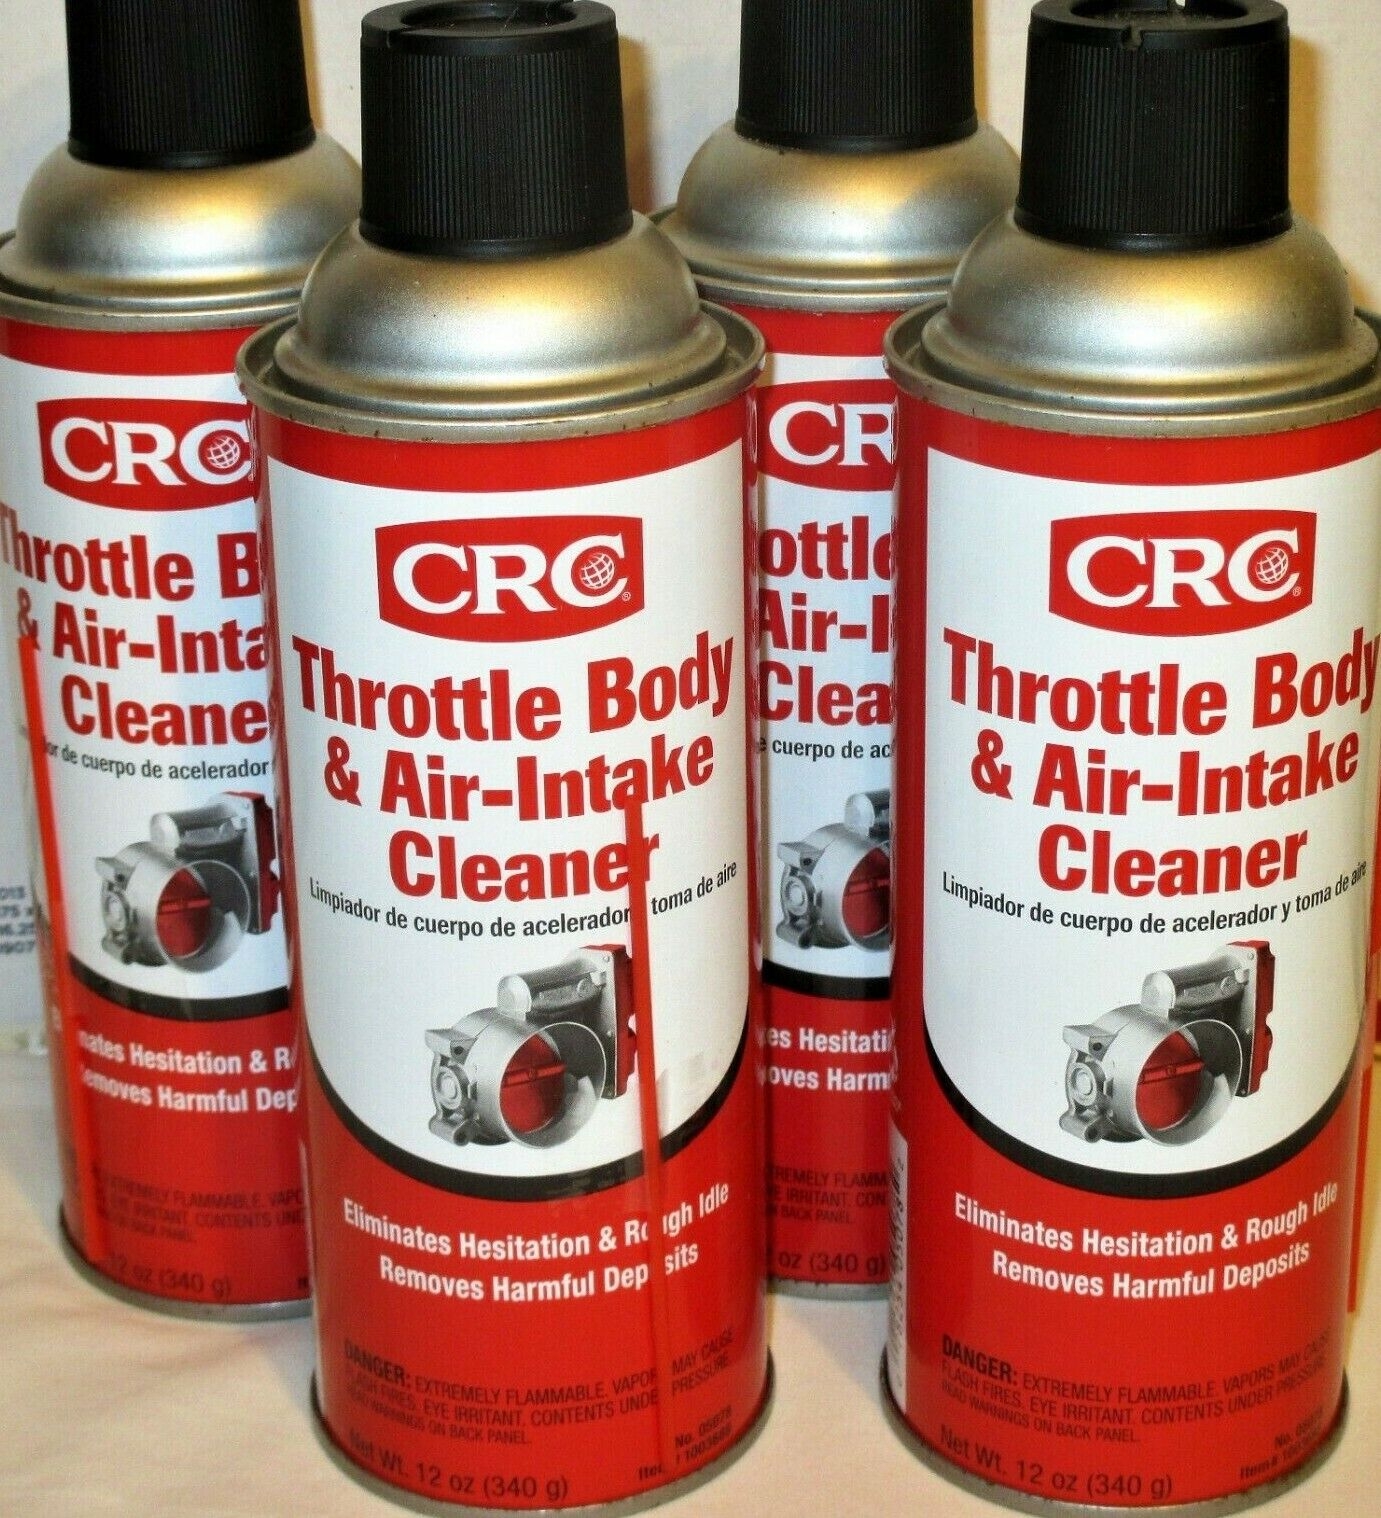  CRC 05078 Throttle Body and Air-Intake Cleaner - 12 Wt